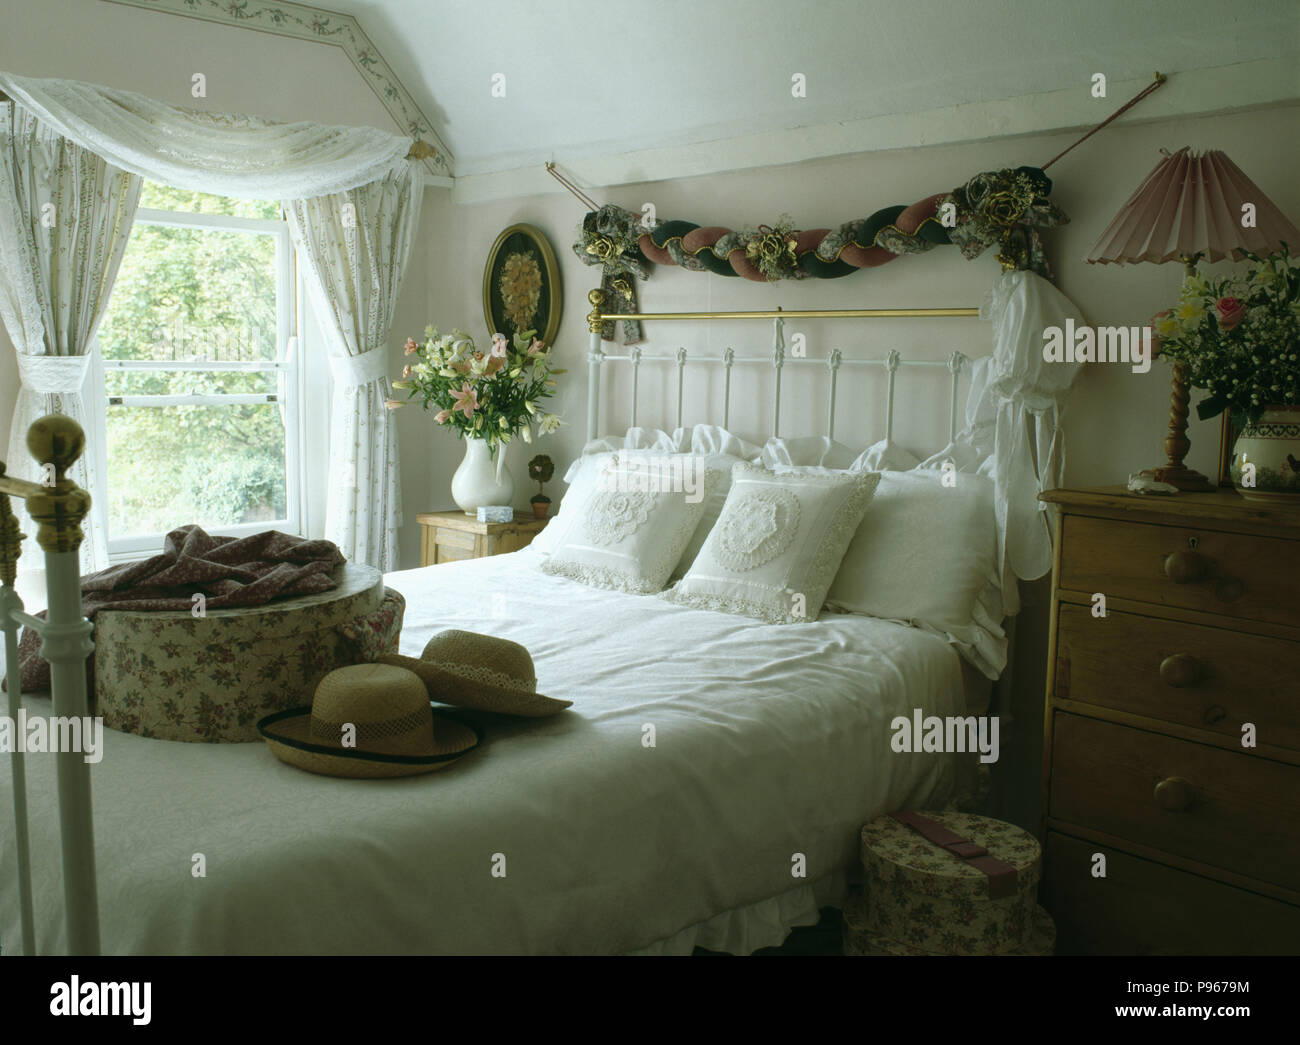 Fabric garland above white wrought-iron and brass bed with hatbox and hats on the bed Stock Photo